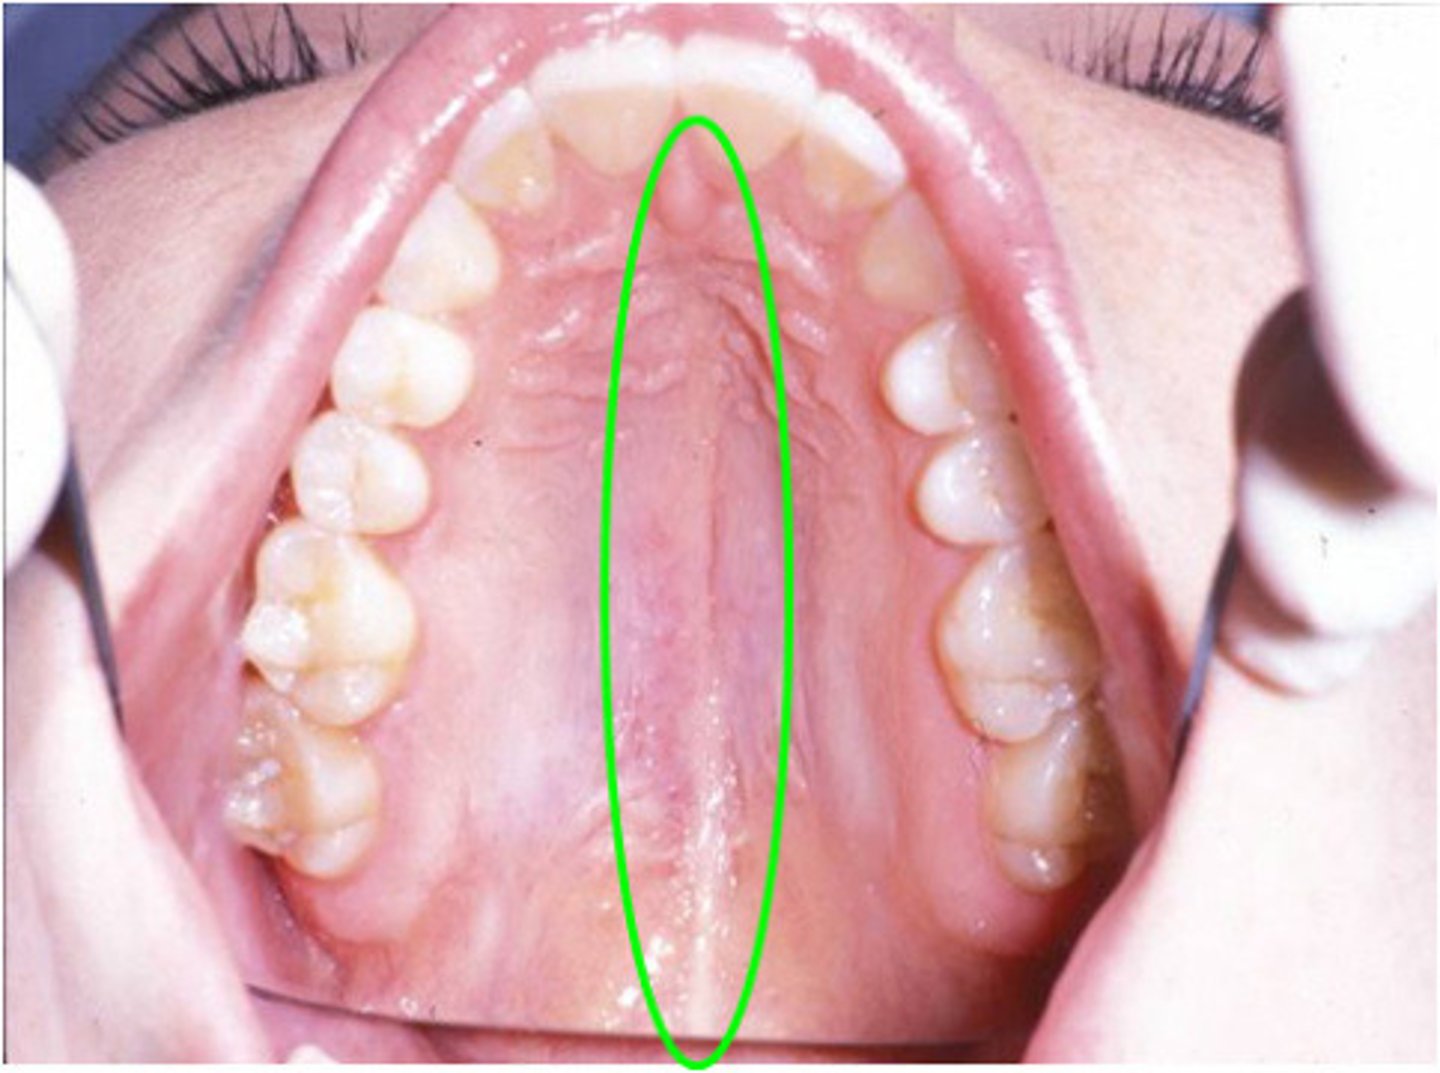 <p>A midline ridge of tissue on the hard palate, which runs from the uvula to the incisive papilla</p>